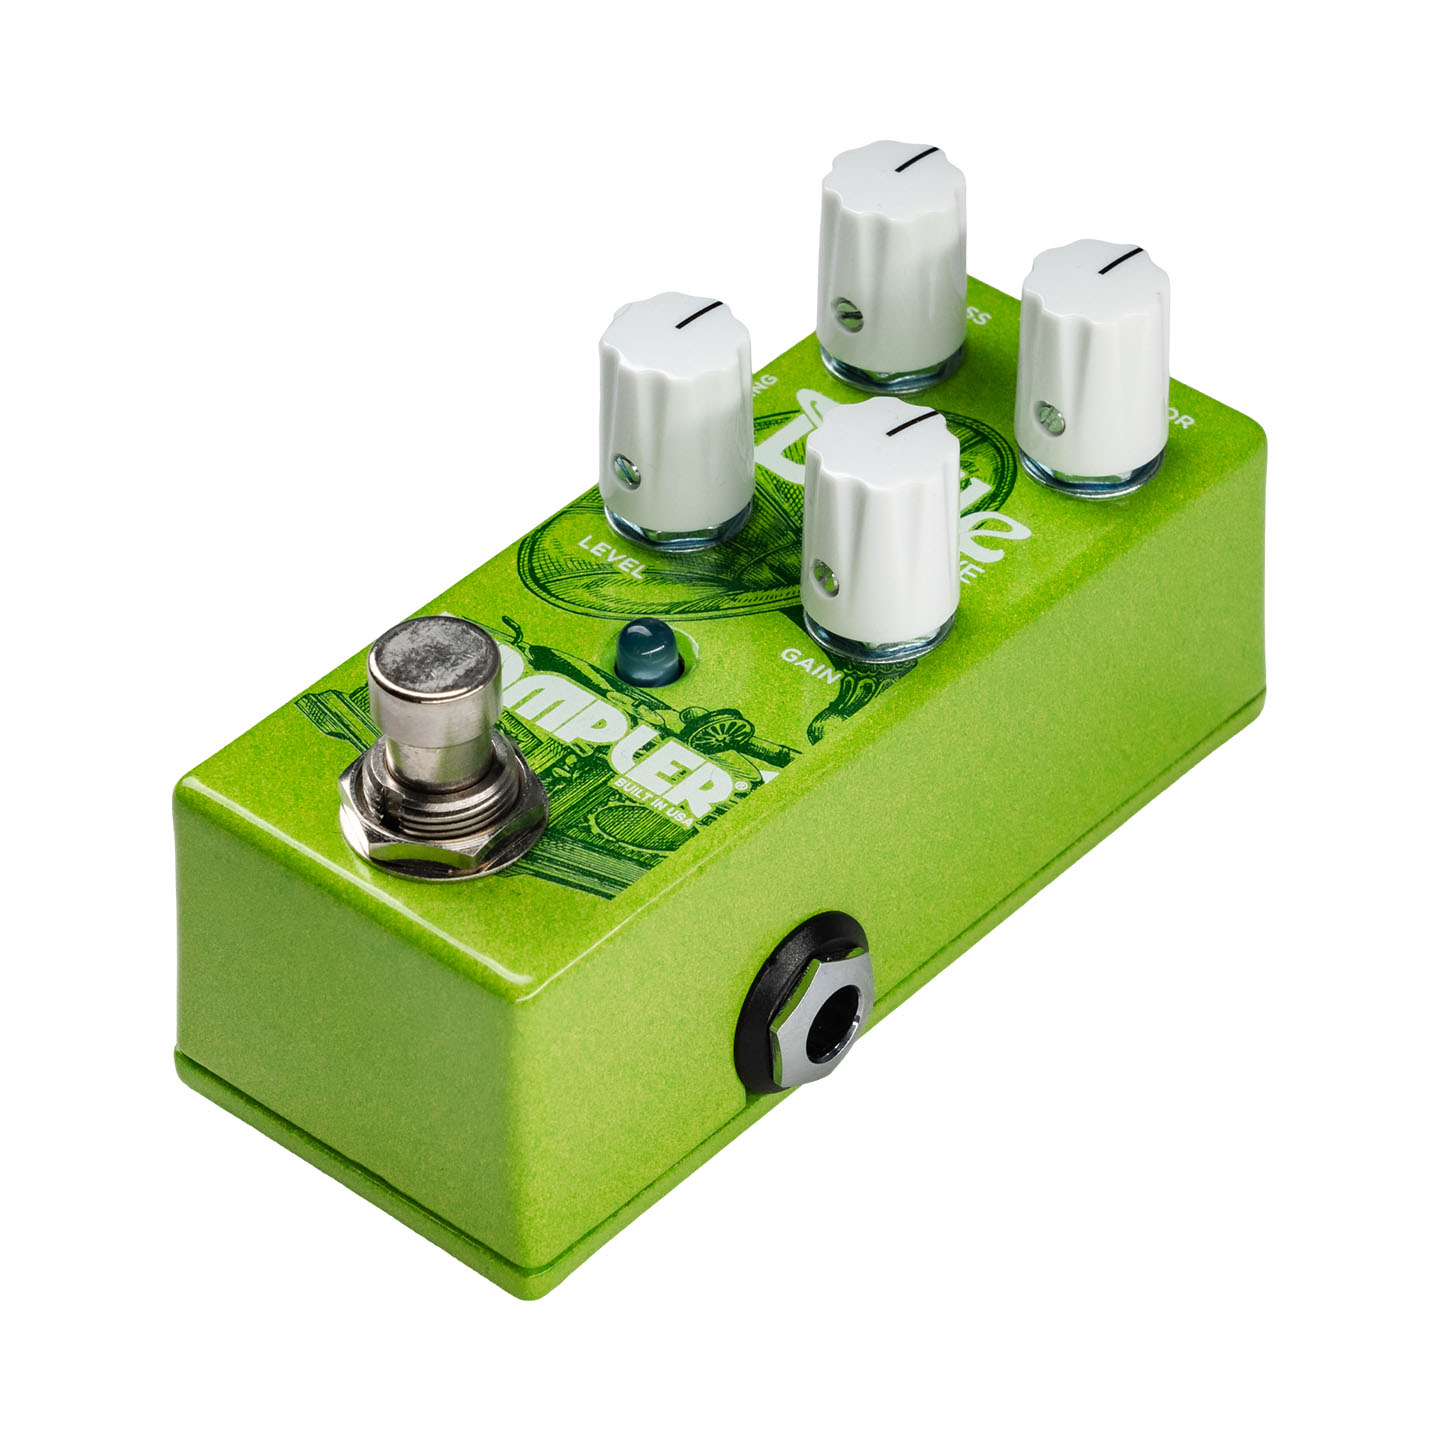 Belle Overdrive Pedal